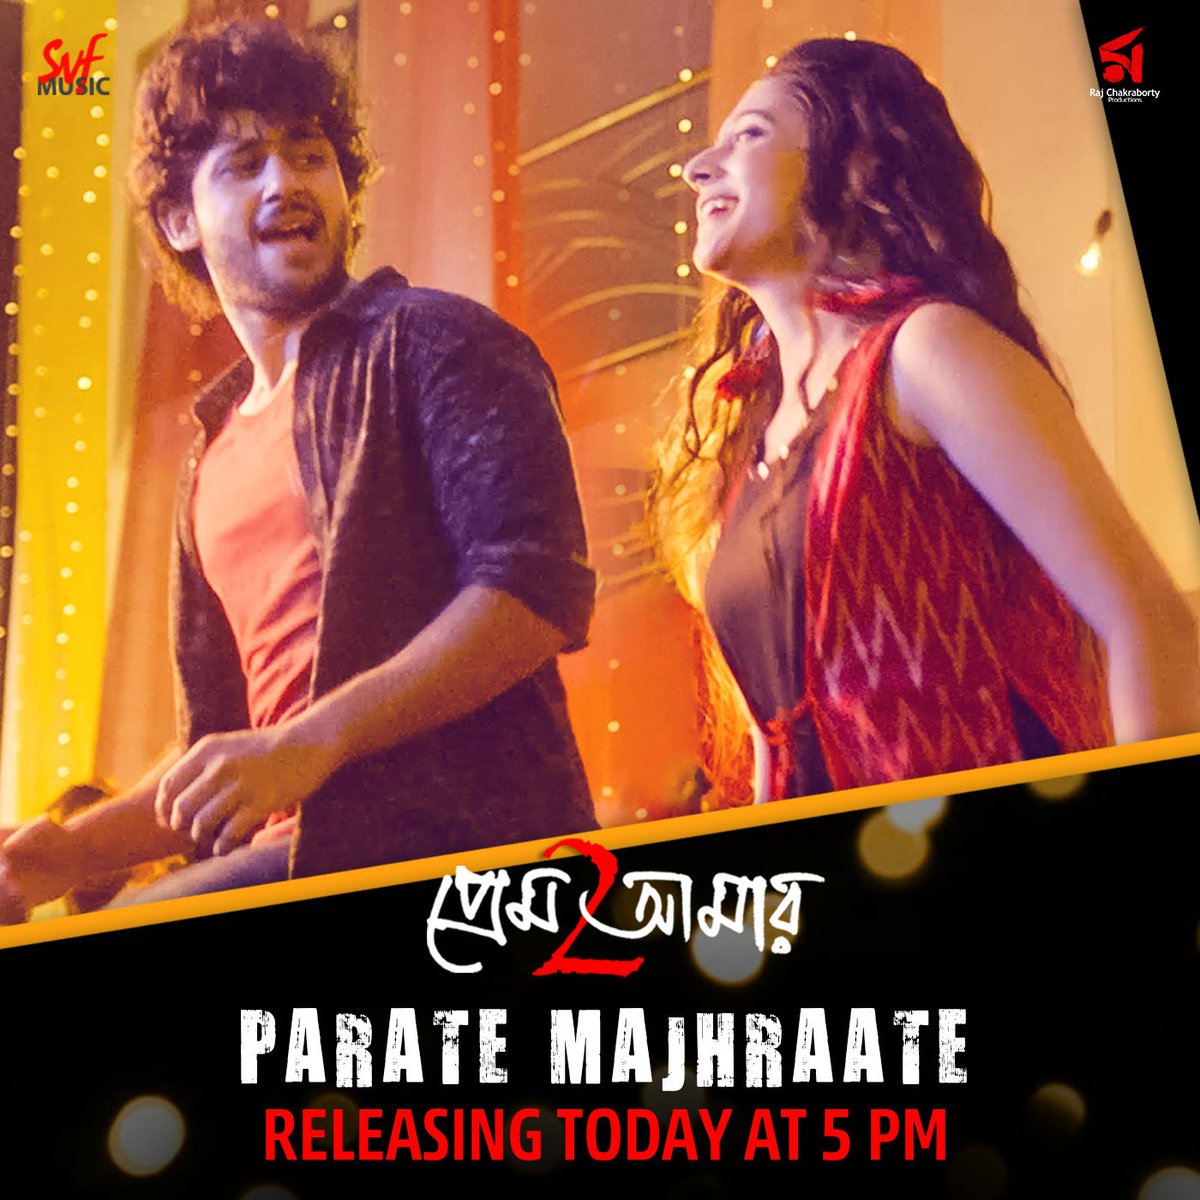 The party song #ParateMajharate from #PremAmar2 is releasing today at 5 PM.
Stay tuned.